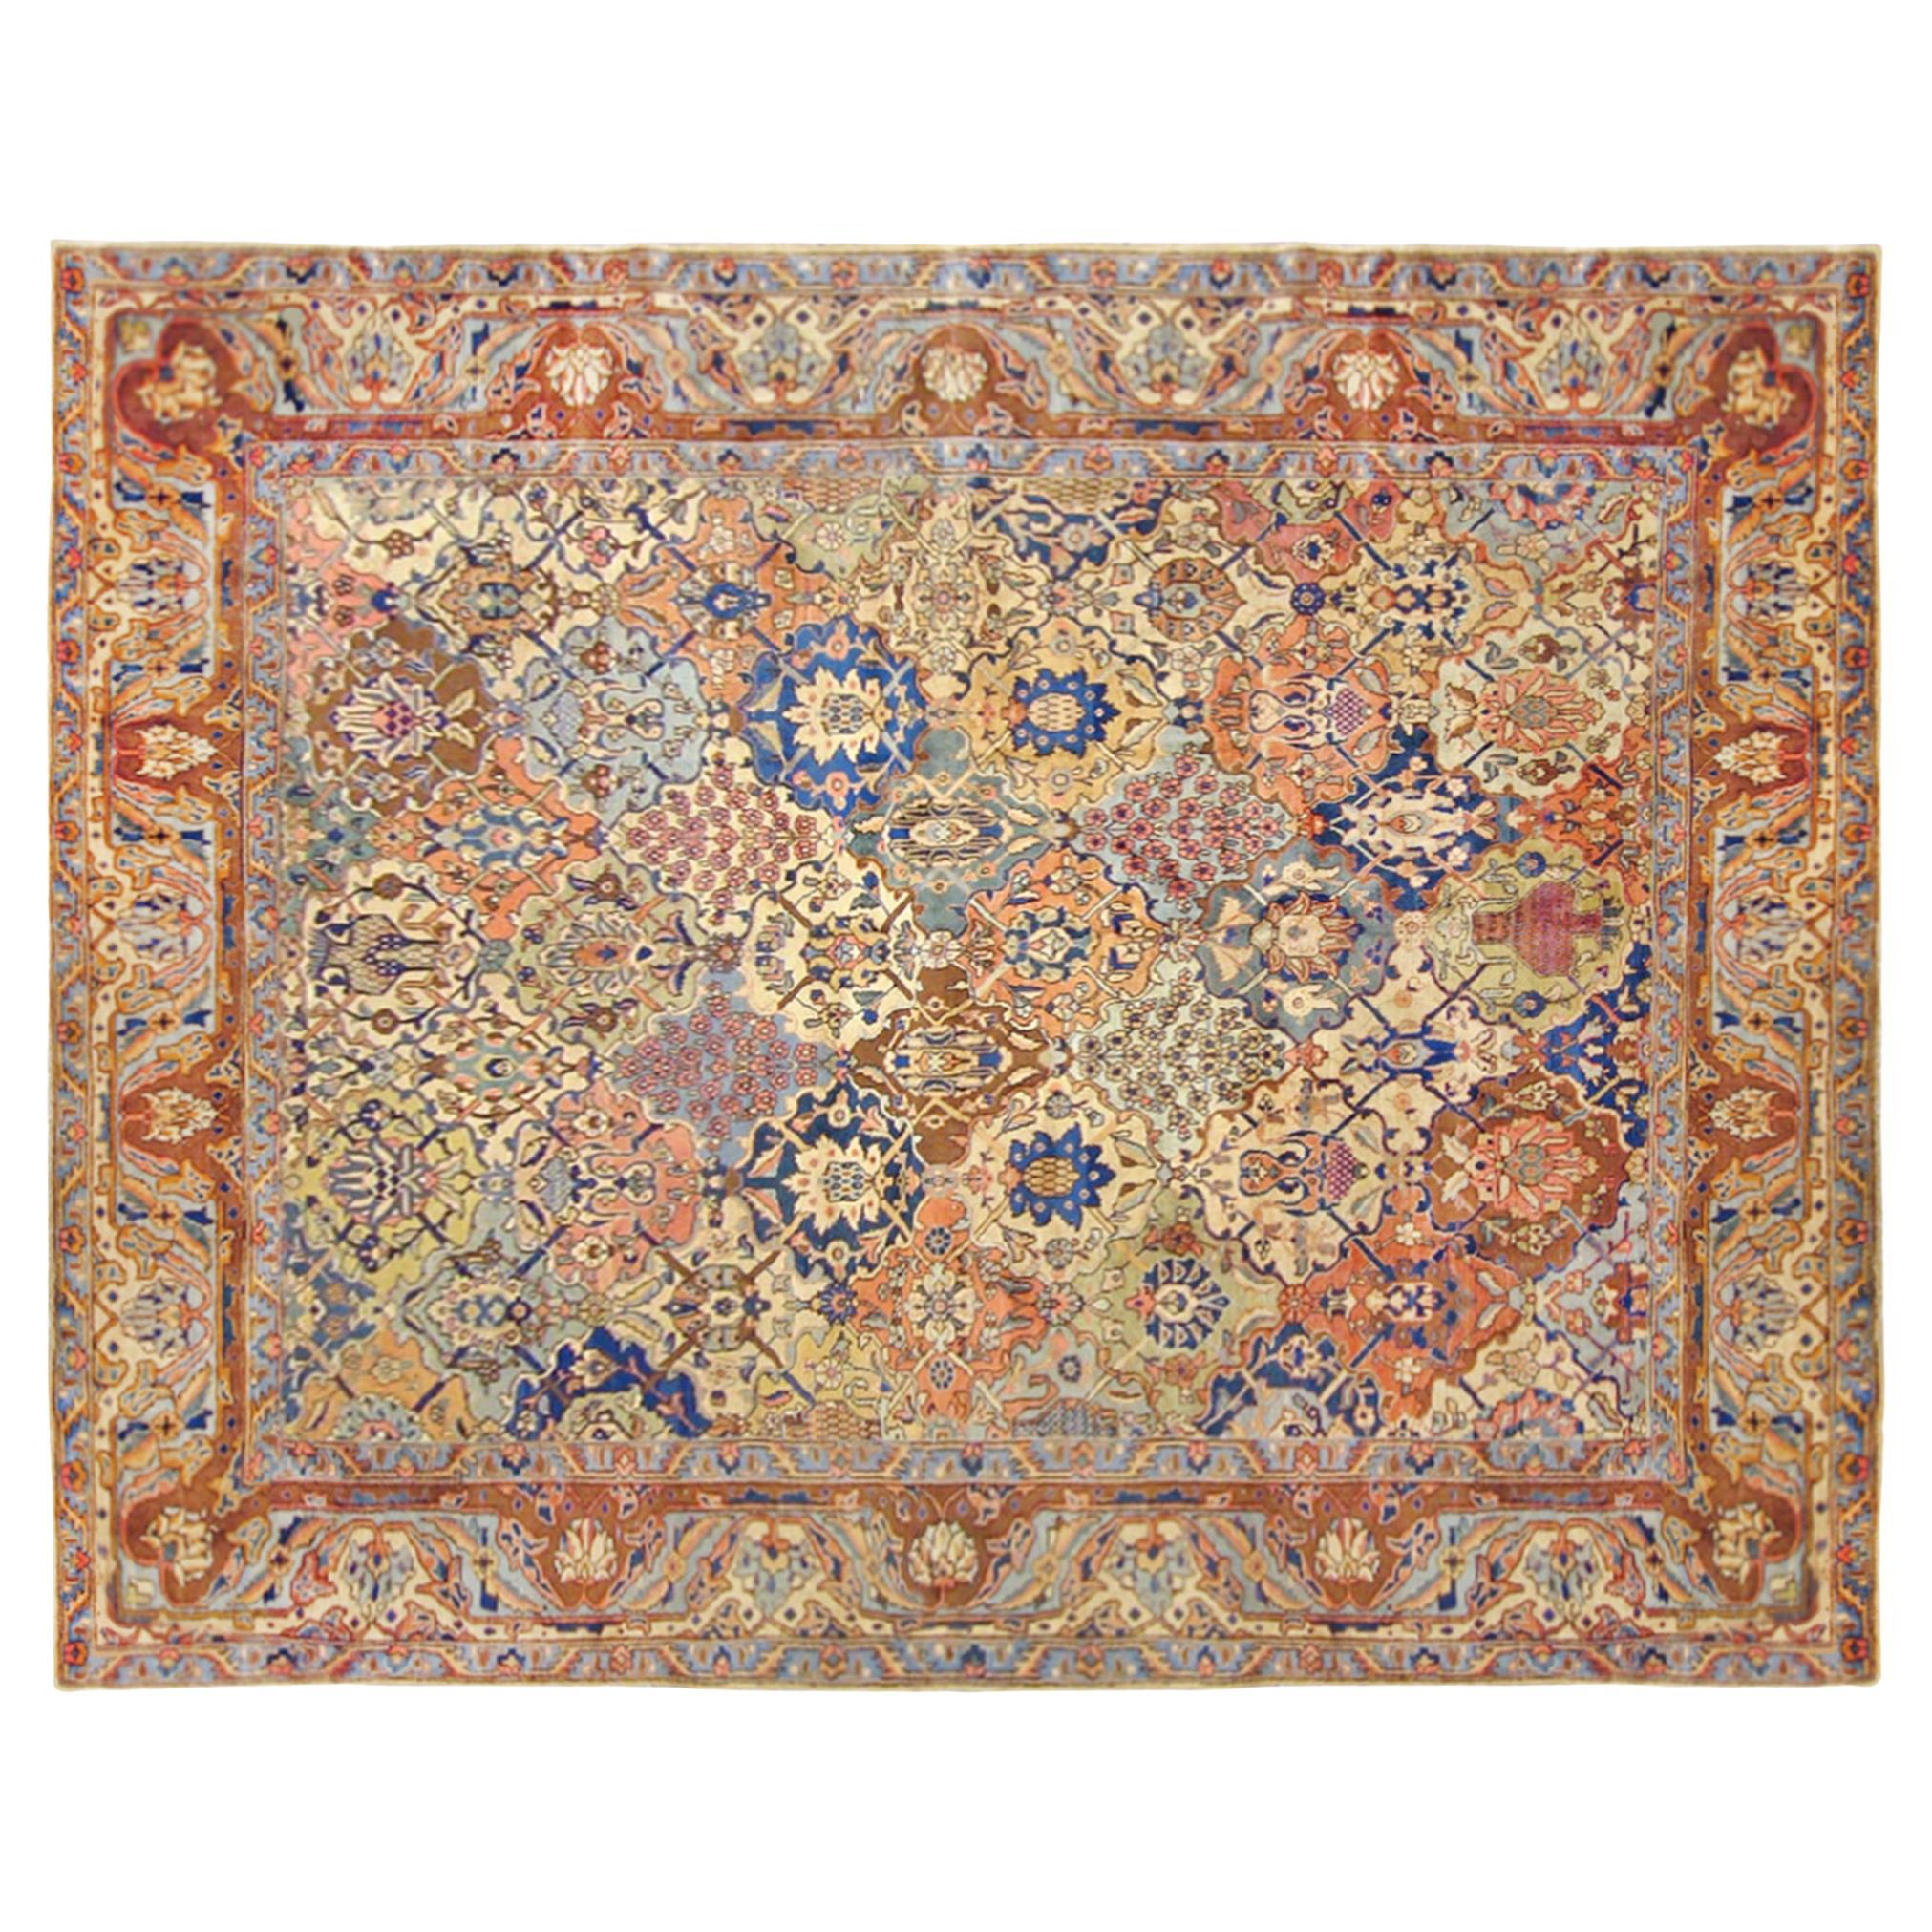 Antique Persian Tabriz Oriental Carpet in Room Size with Petagh Design For Sale